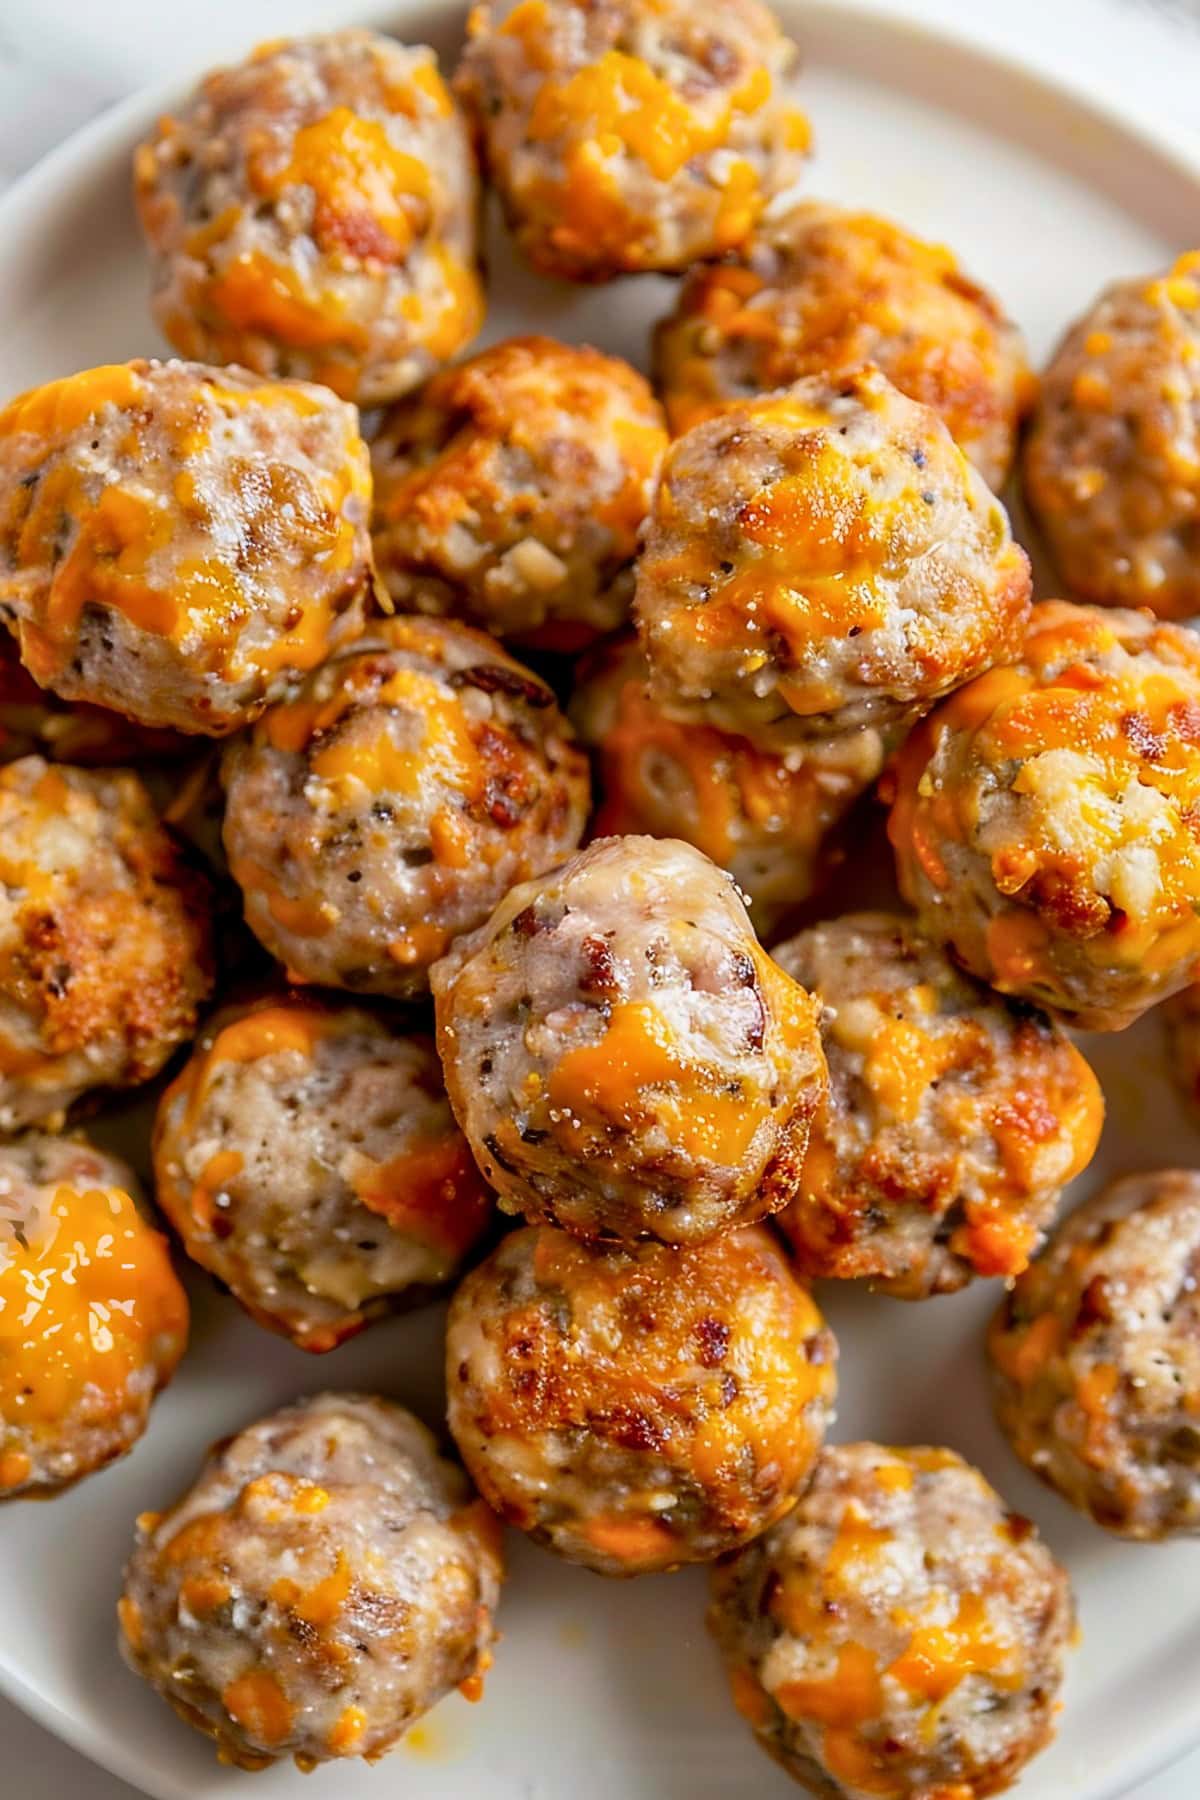 Top View of Cheesy, Golden Cream Cheese Sausage Balls on a Plate